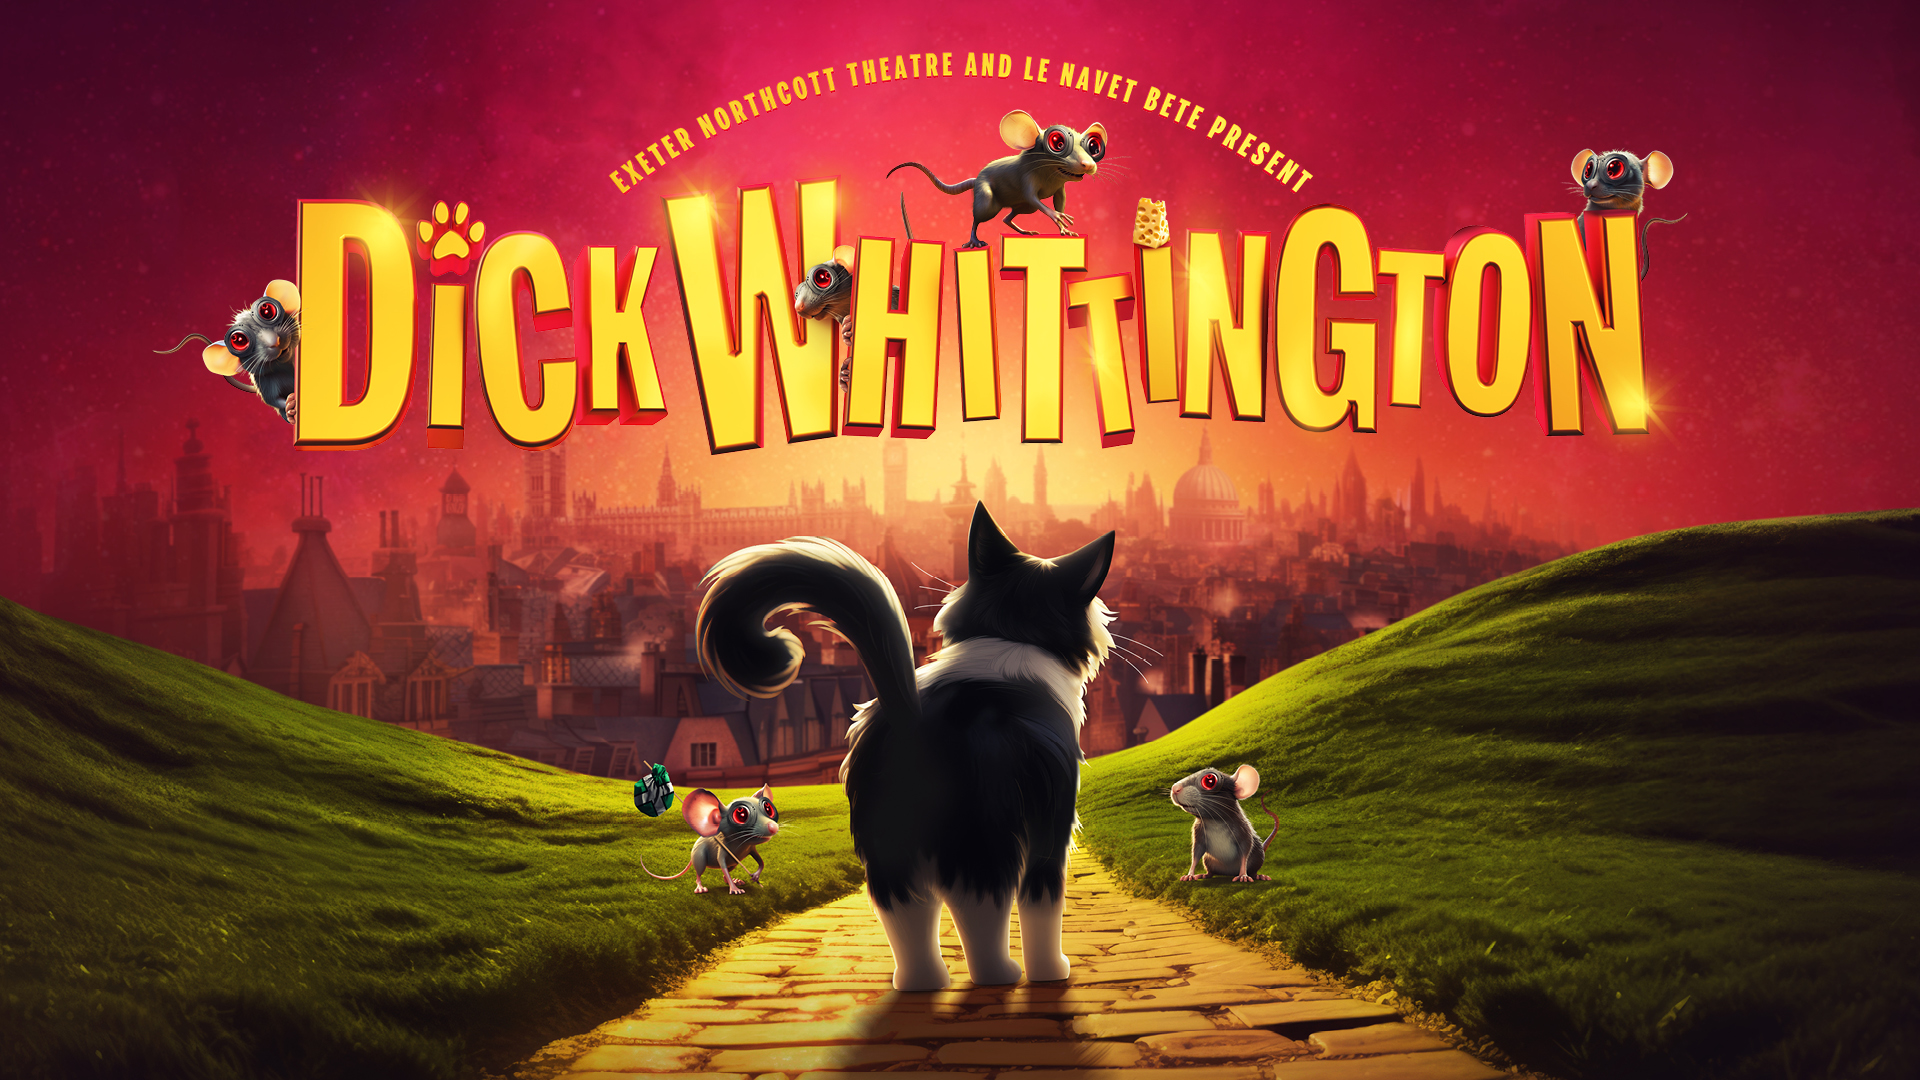 Exeter Northcott Theatre and Le Navet Bete's Dick Whittington artwork. Background: a foggy panorama photo of the city of London, with iconic buildings such as Big Ben, the Houses of Parliament, and St Paul's Cathedral. The cityscape is washed over with a burgundy haze. Foreground: A black and white cat (black body, white neck collar, white paws) looks towards the cityscape and we see them in near silhouette. They are stood on a yellow-brick path, with green grassy hills either side of them. On the hills, grey rats with large red eyes. On the left hand side of the cat, a rat holds a stereotypical hobo sack on a stick. At the top of the artwork, gold text reads: 'Exeter Northcott Theatre and Le Navet Bete present Dick Whittington.' Another group of rats with large red eyes are playing around the letters in 'Dick Whittington'. A cat paw icon replaces the dot on top of the letter 'I' in 'Dick', and a block of cheese replaces the dot on top of the second letter 'I' in 'Whittington.